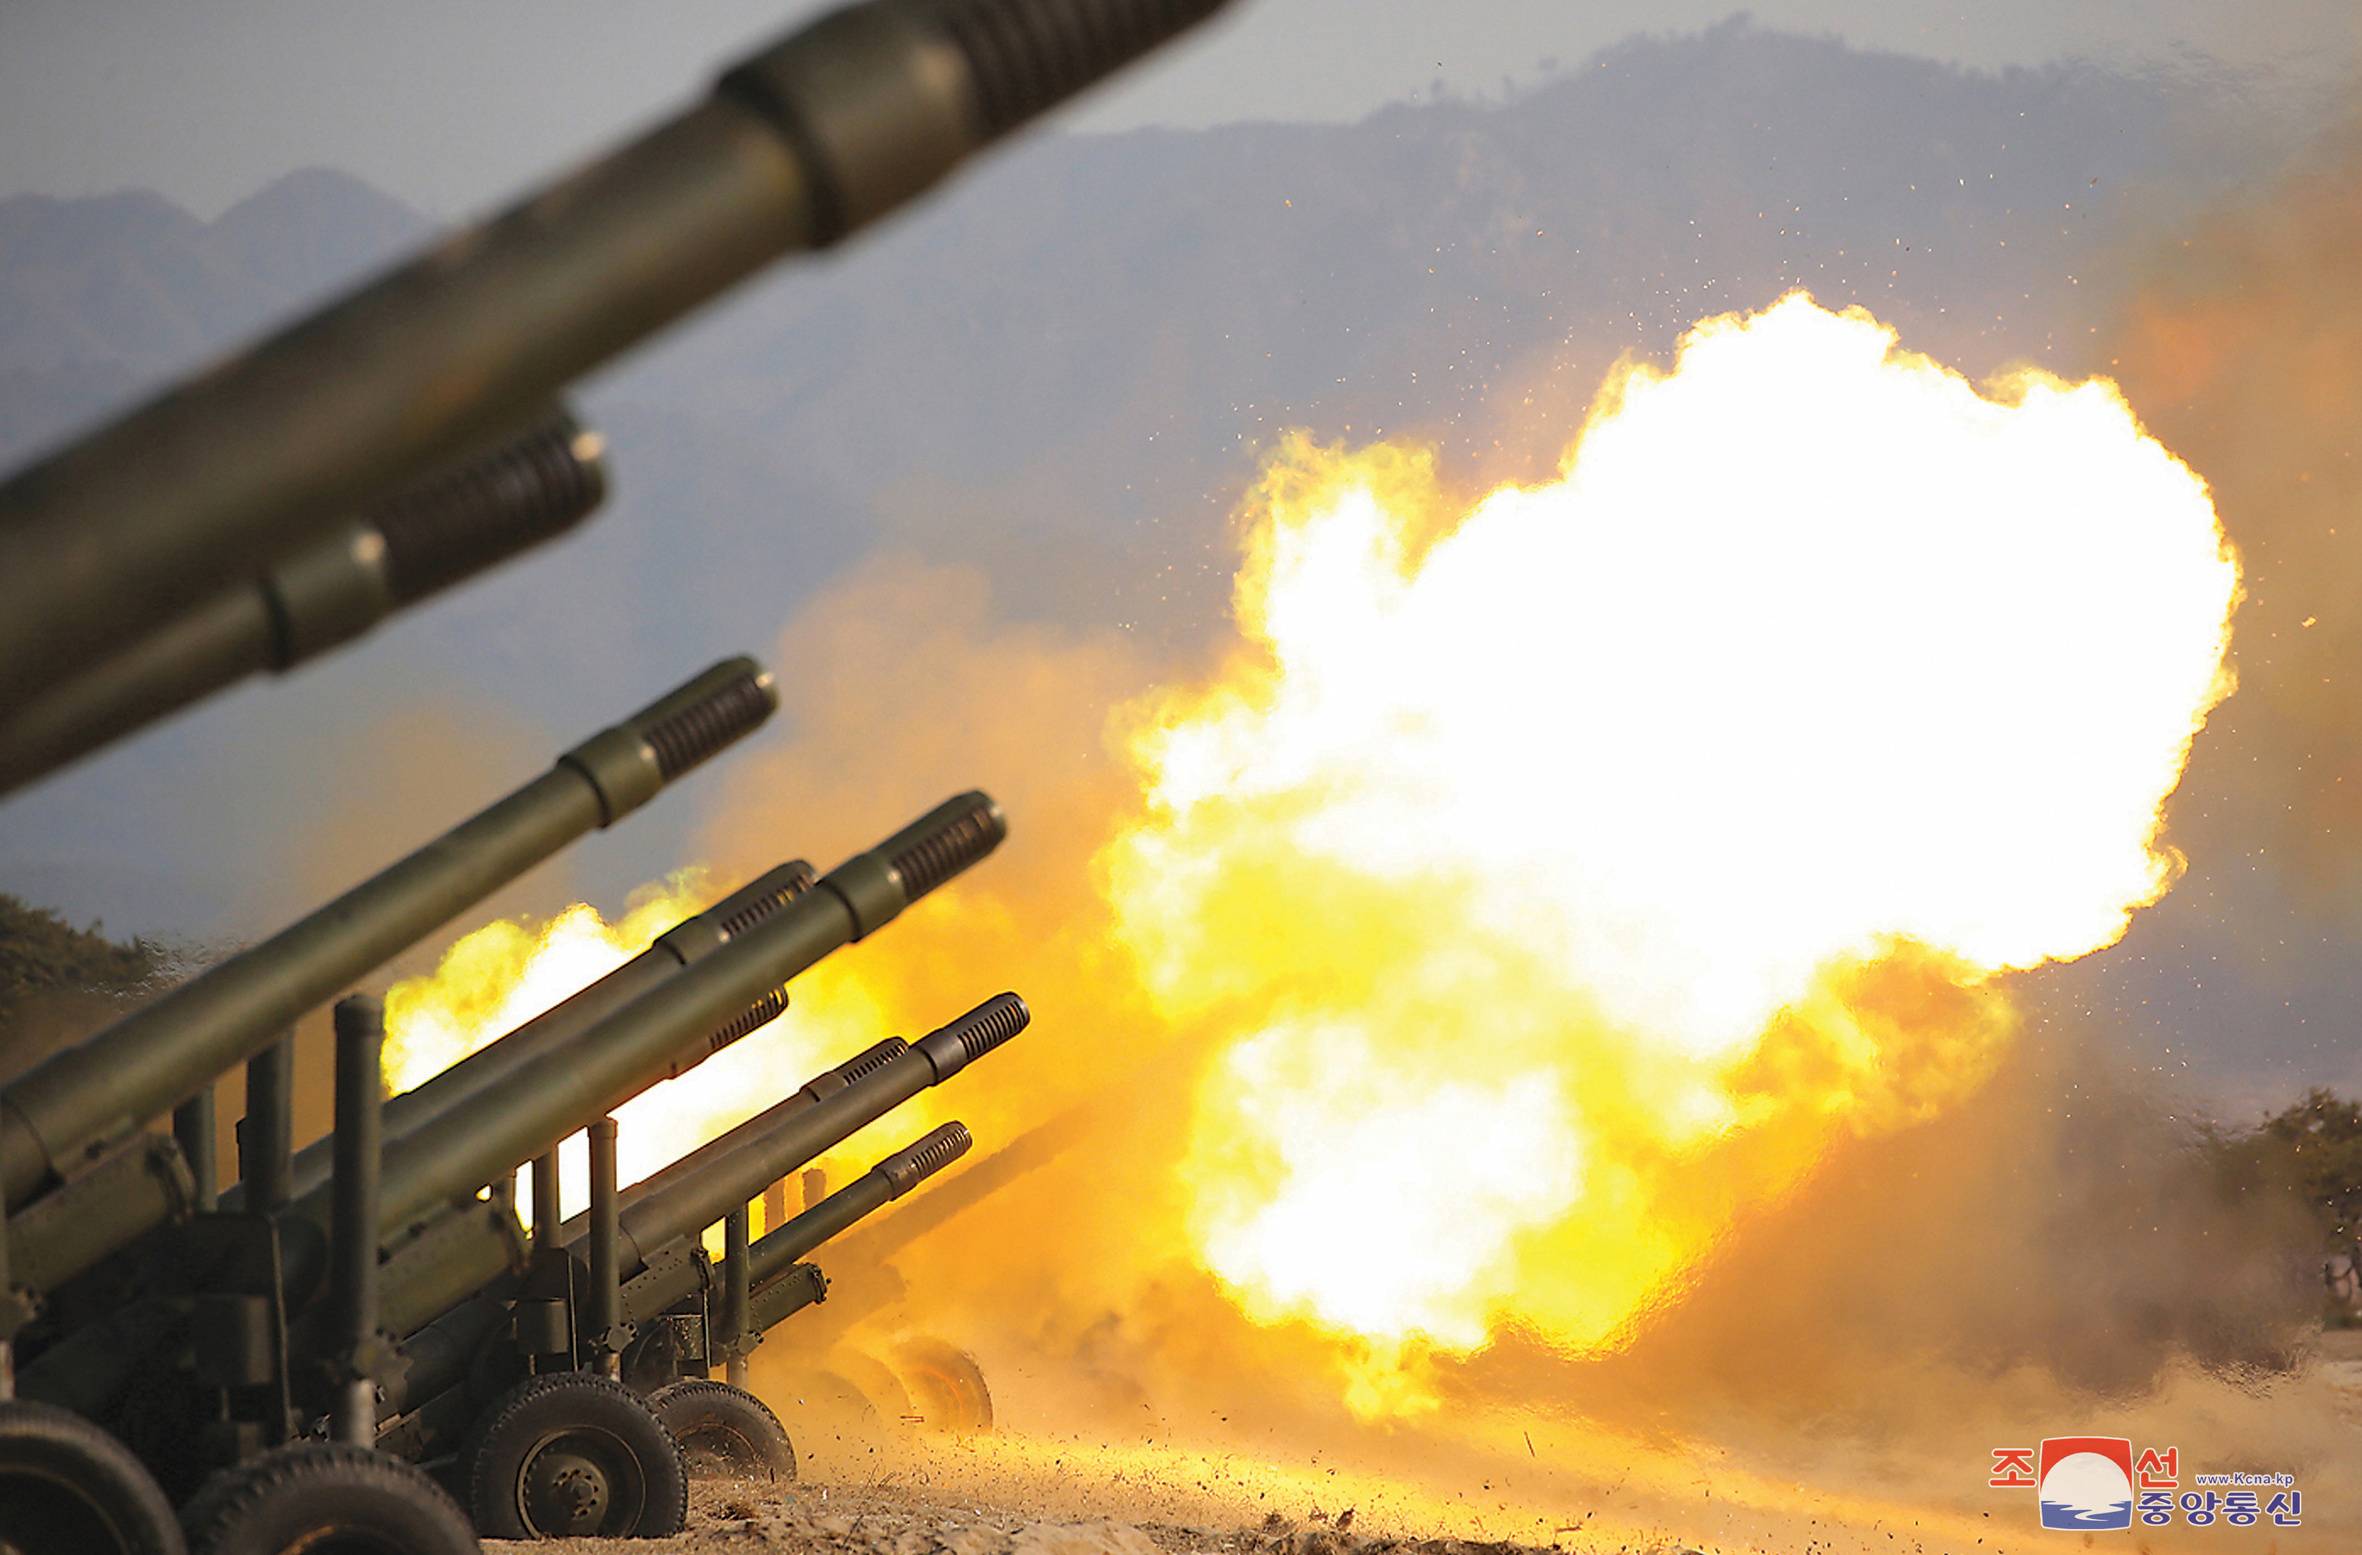 An artillery fire competition between units under the Korean People's Army Corps 7 and Corps 9 takes place at a training ground in North Korea in March 2020. | KCNA VIA REUTERS 